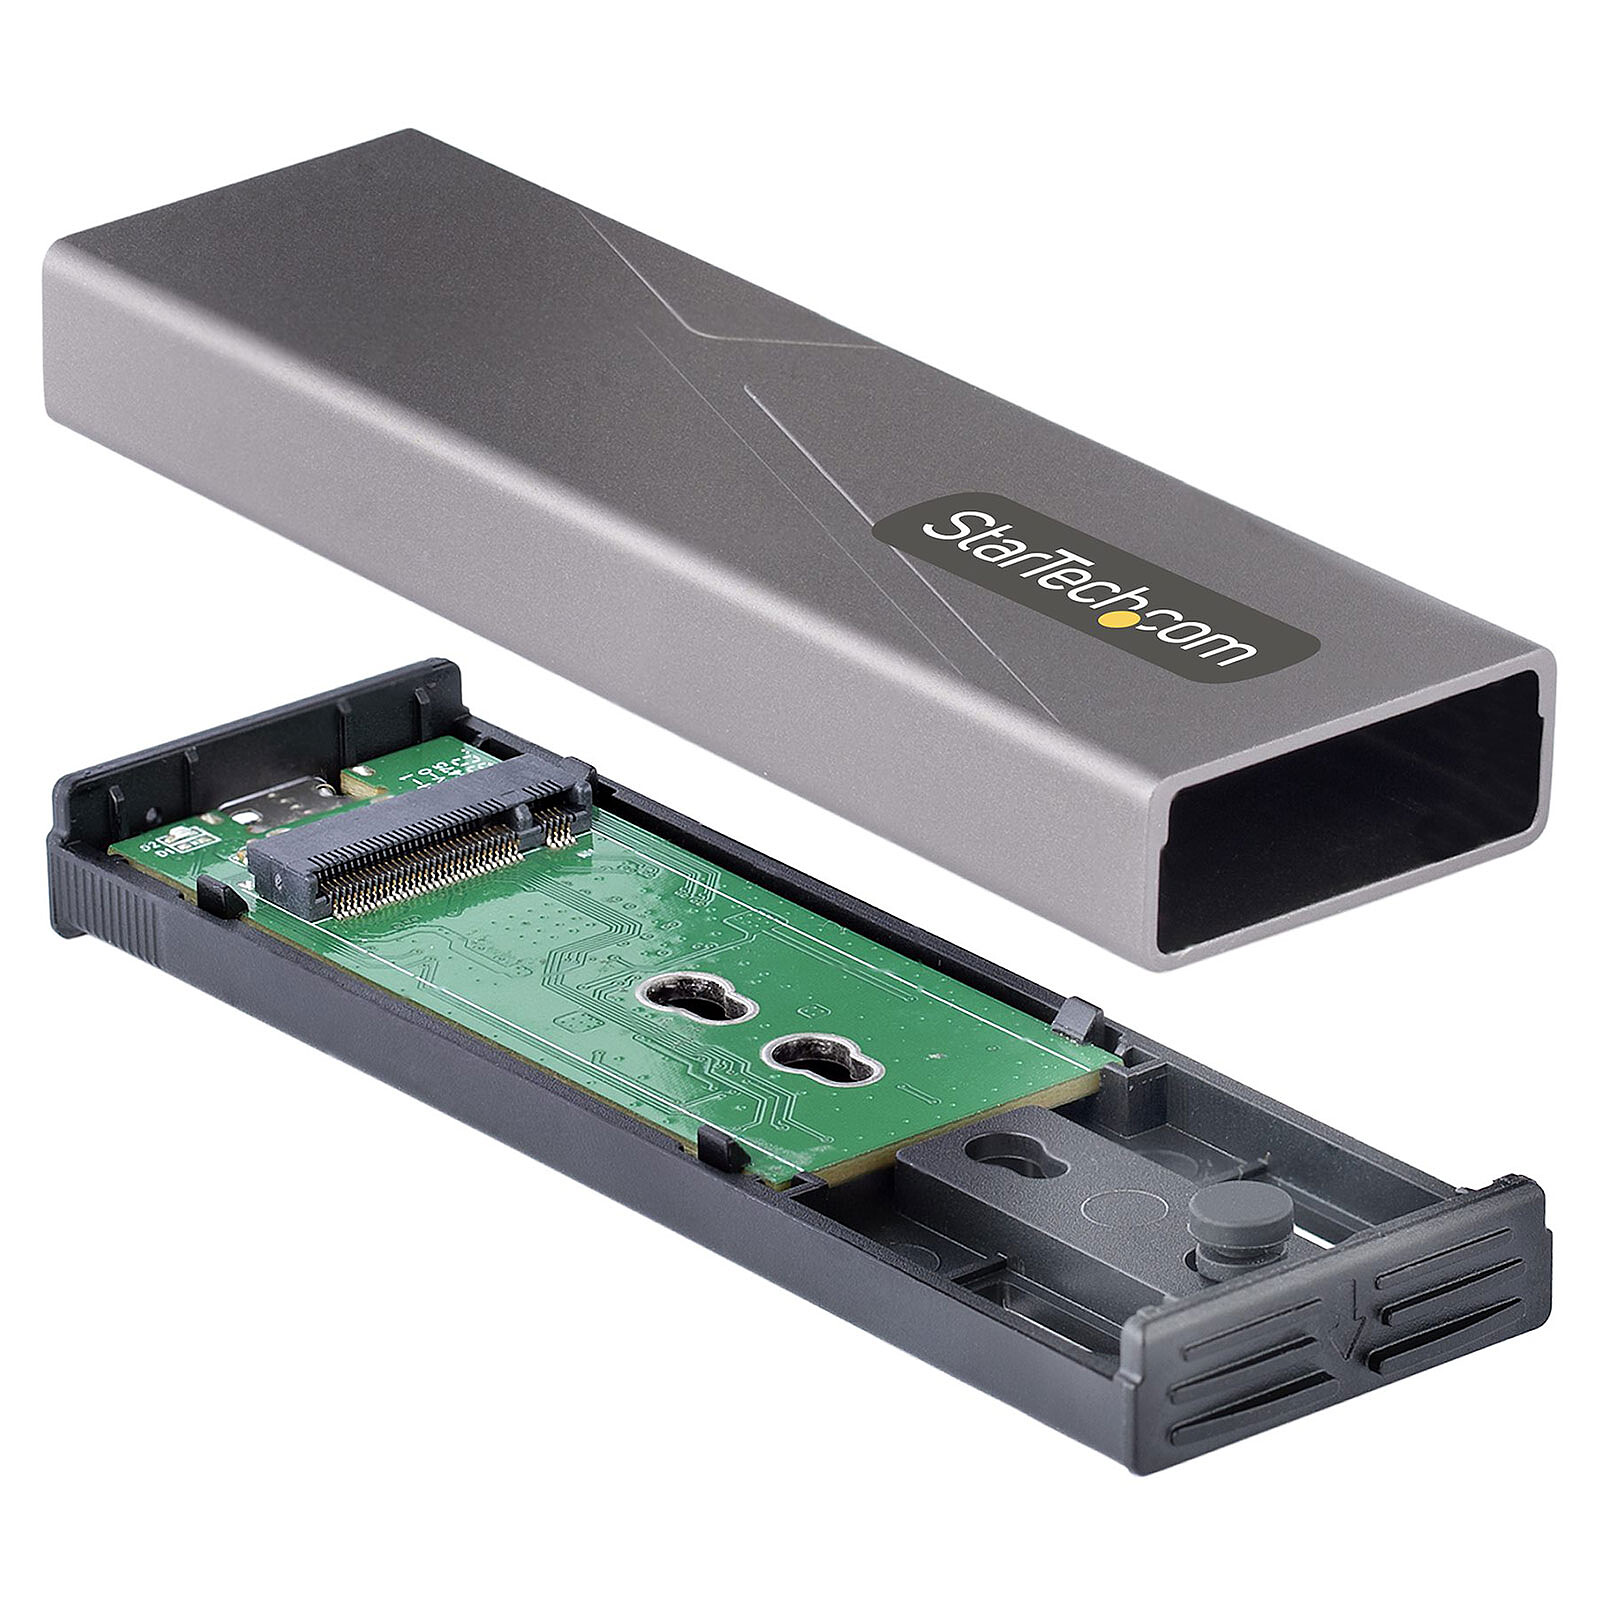 Boitier externe We SSD M.2 S-ATA - WE